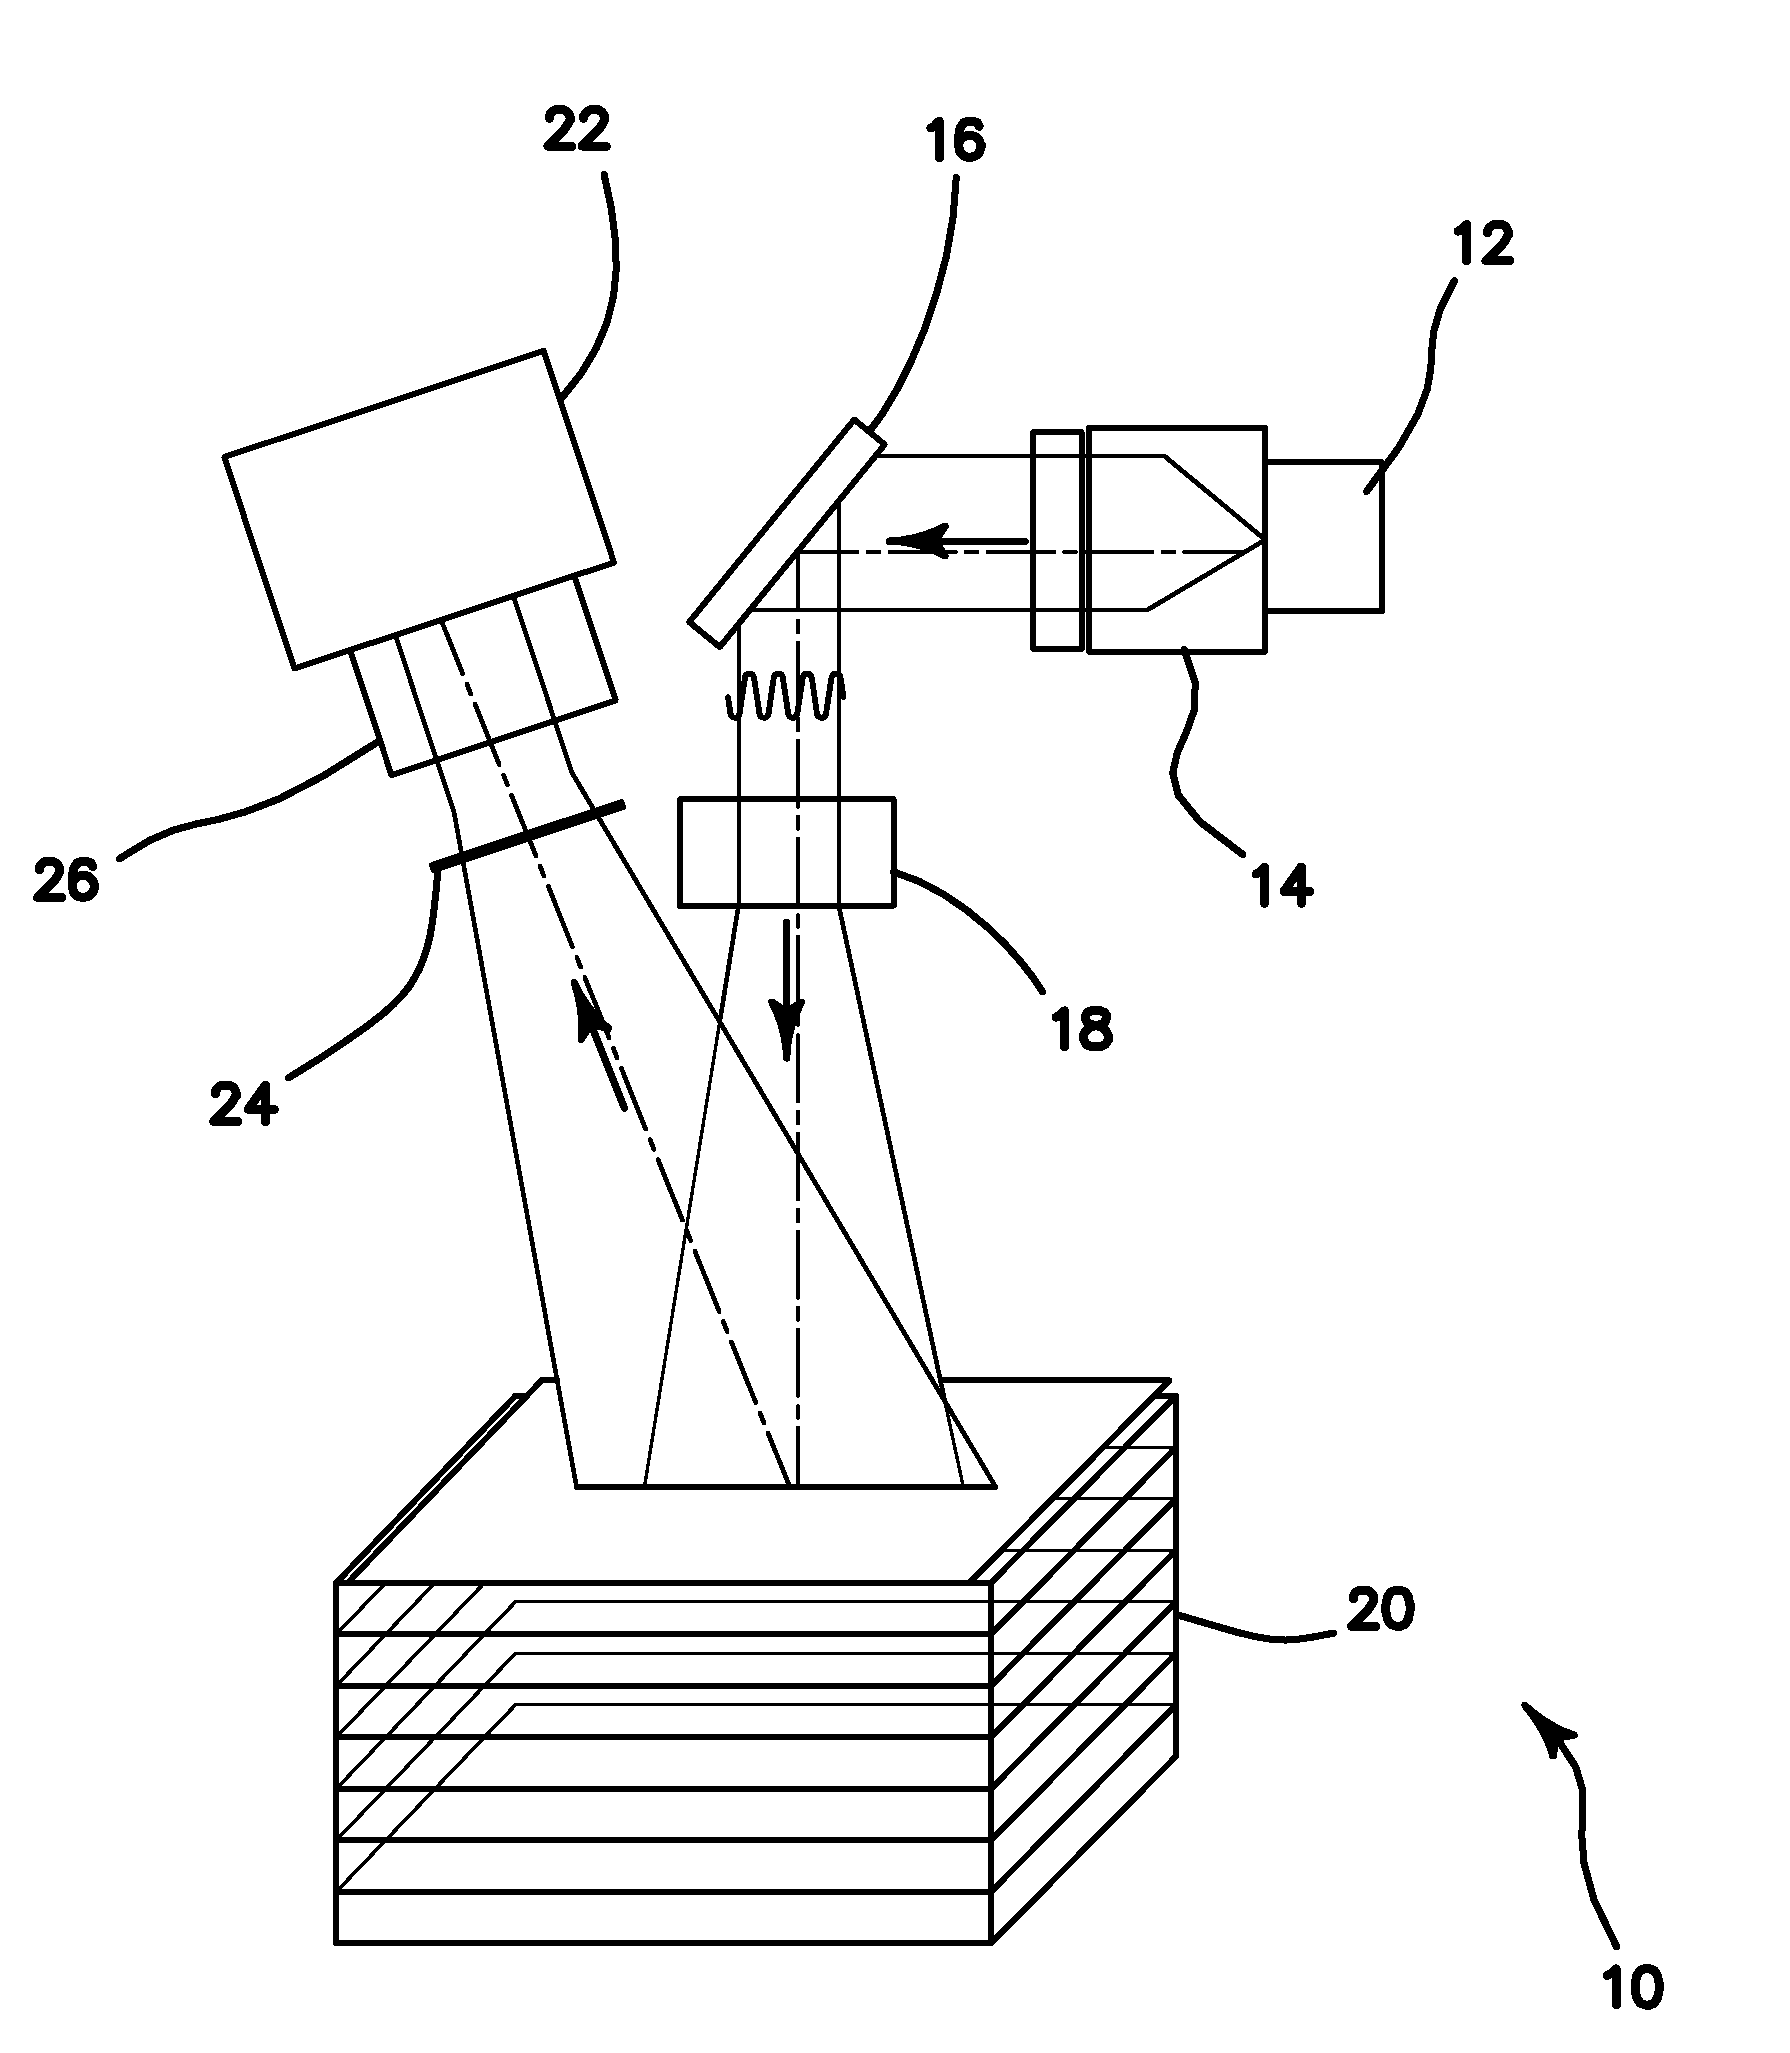 Method and apparatus for performing qualitative and quantitative analysis of burn extent and severity using spatially structured illumination